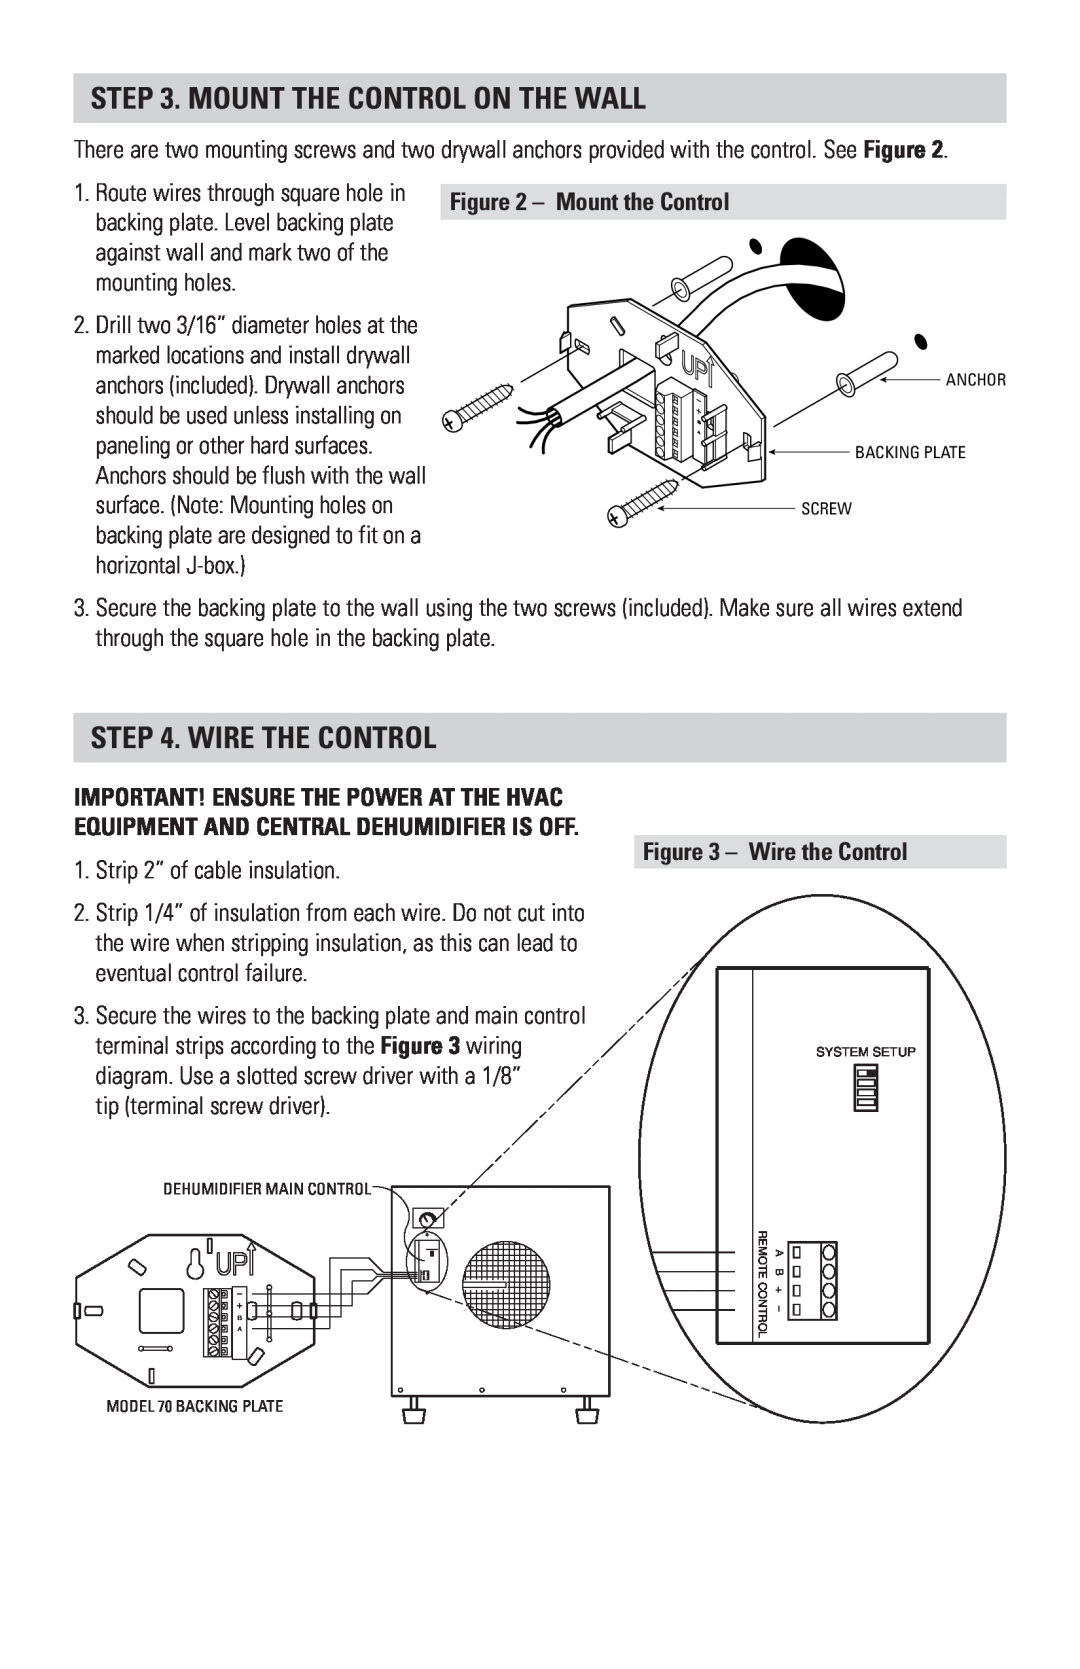 Aprilaire 70 installation manual Mount The Control On The Wall, Wire The Control, Wire the Control, Mount the Control 